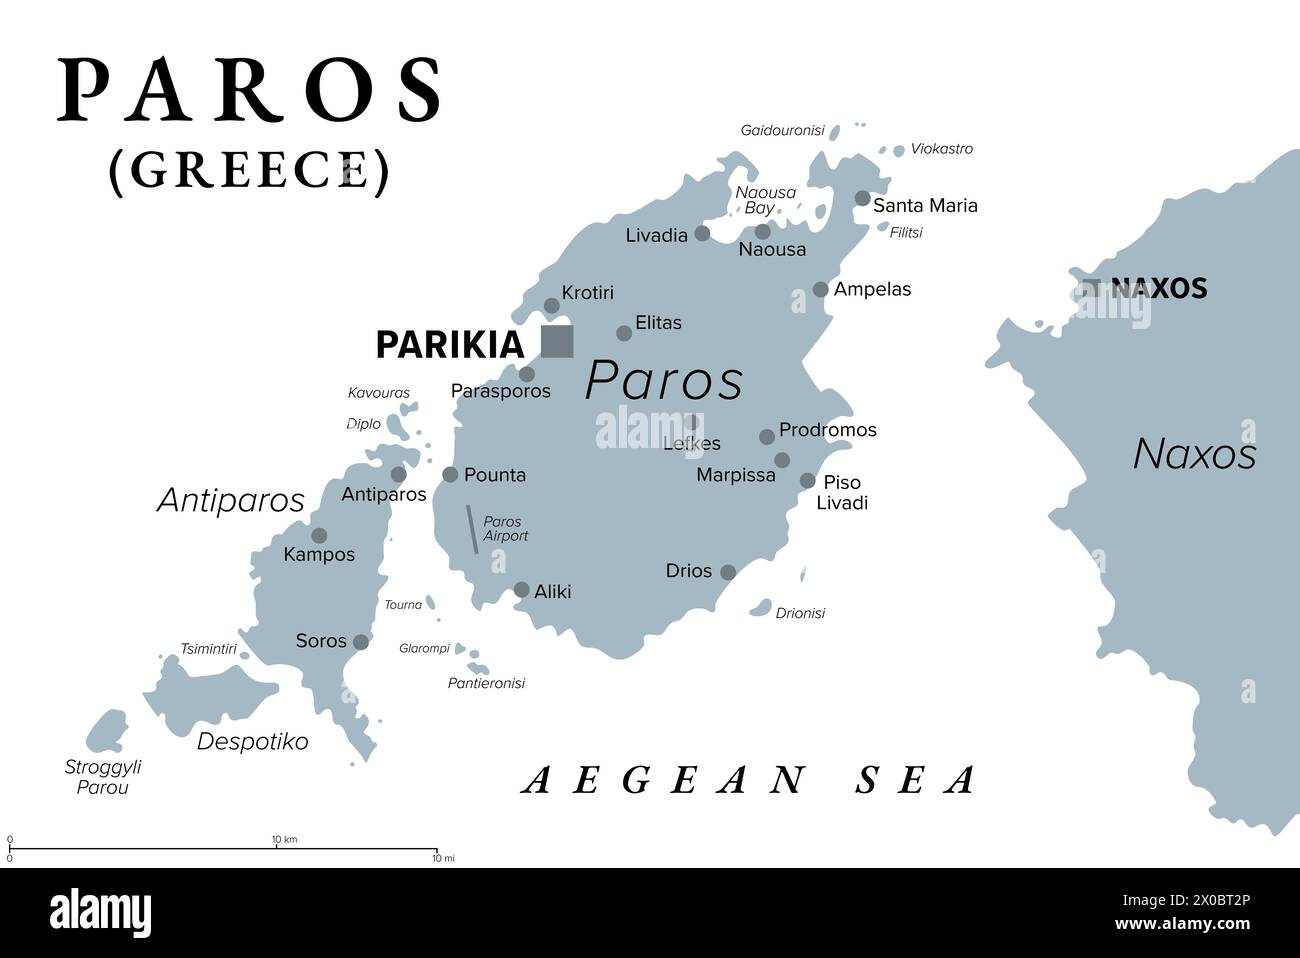 Paros, Greek island, gray political map. Island of Greece in the Aegean Sea, west of Naxos, and part of the Cyclades. Stock Photo